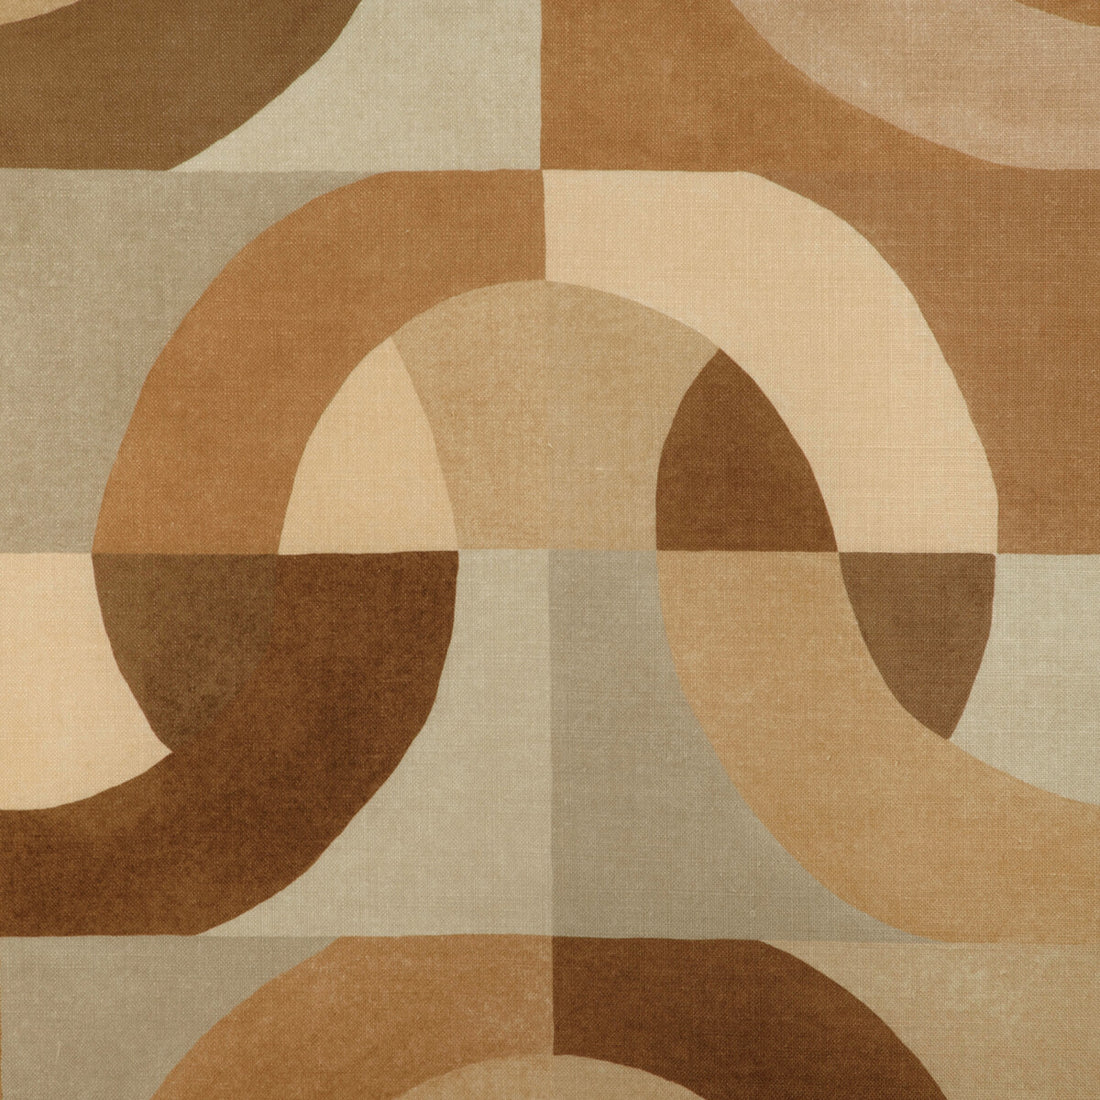 Colonnade fabric in dorado color - pattern GWF-3788.1216.0 - by Lee Jofa Modern in the Kelly Wearstler VII collection